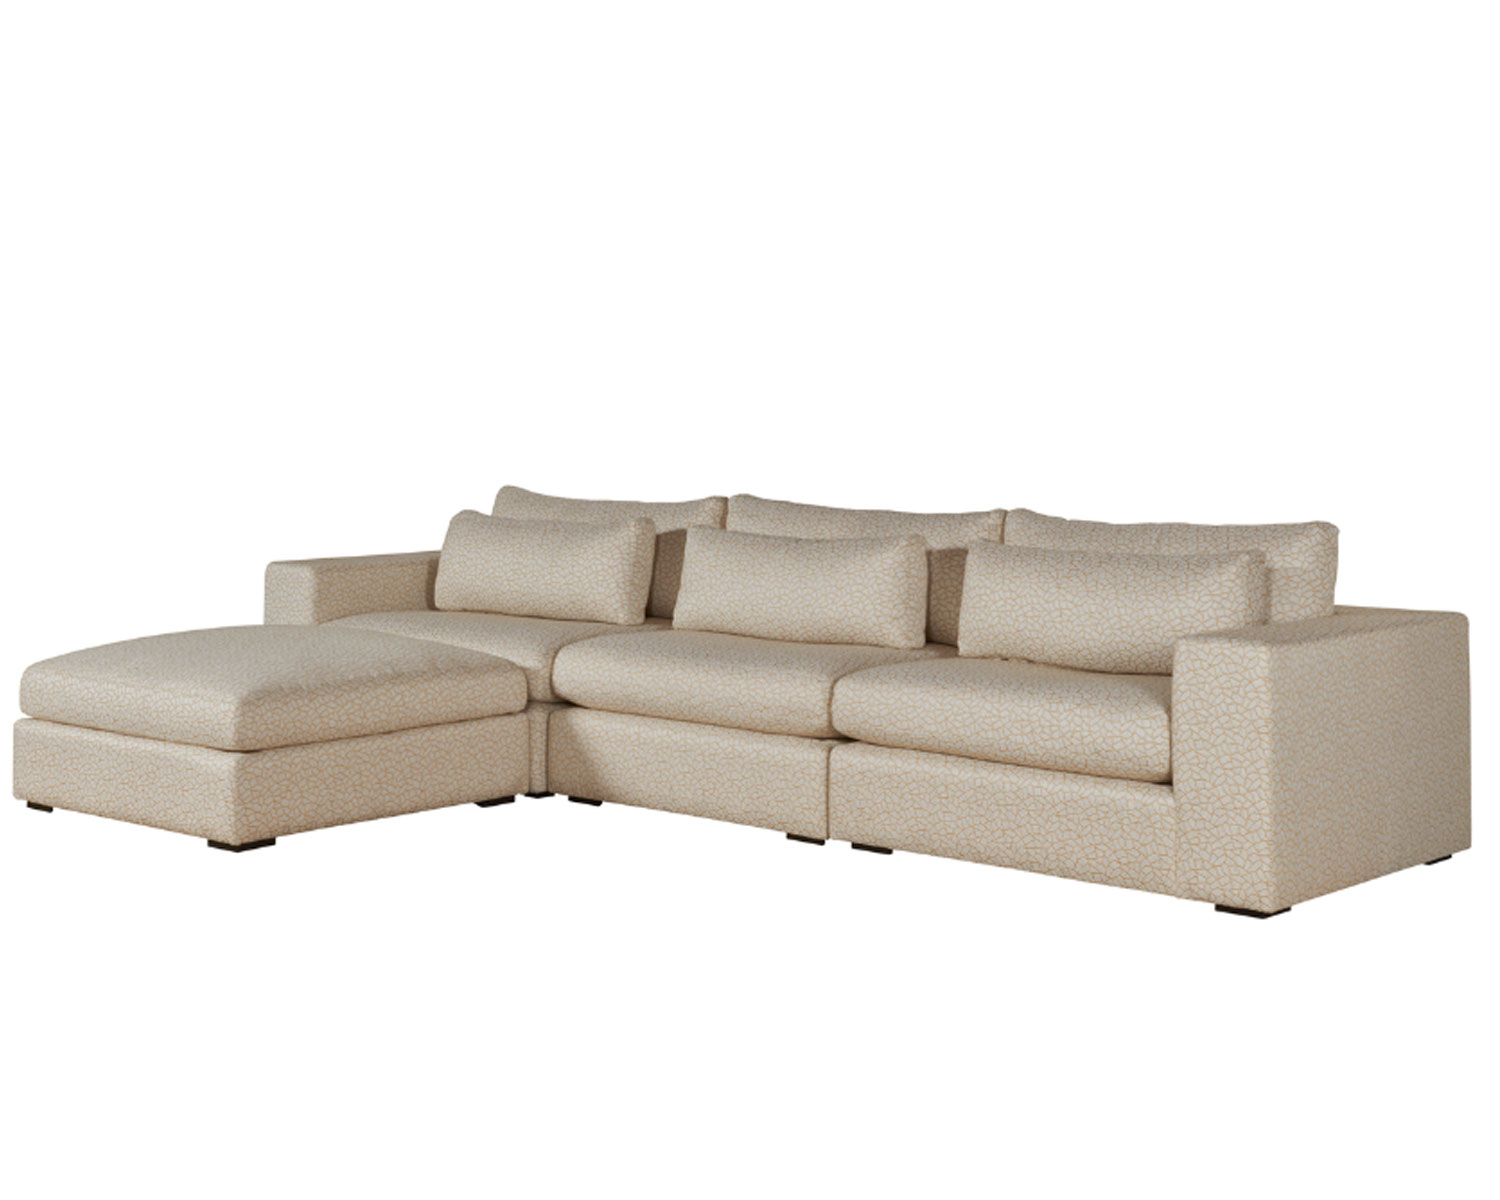 Our House 400 Parkshore Sectional